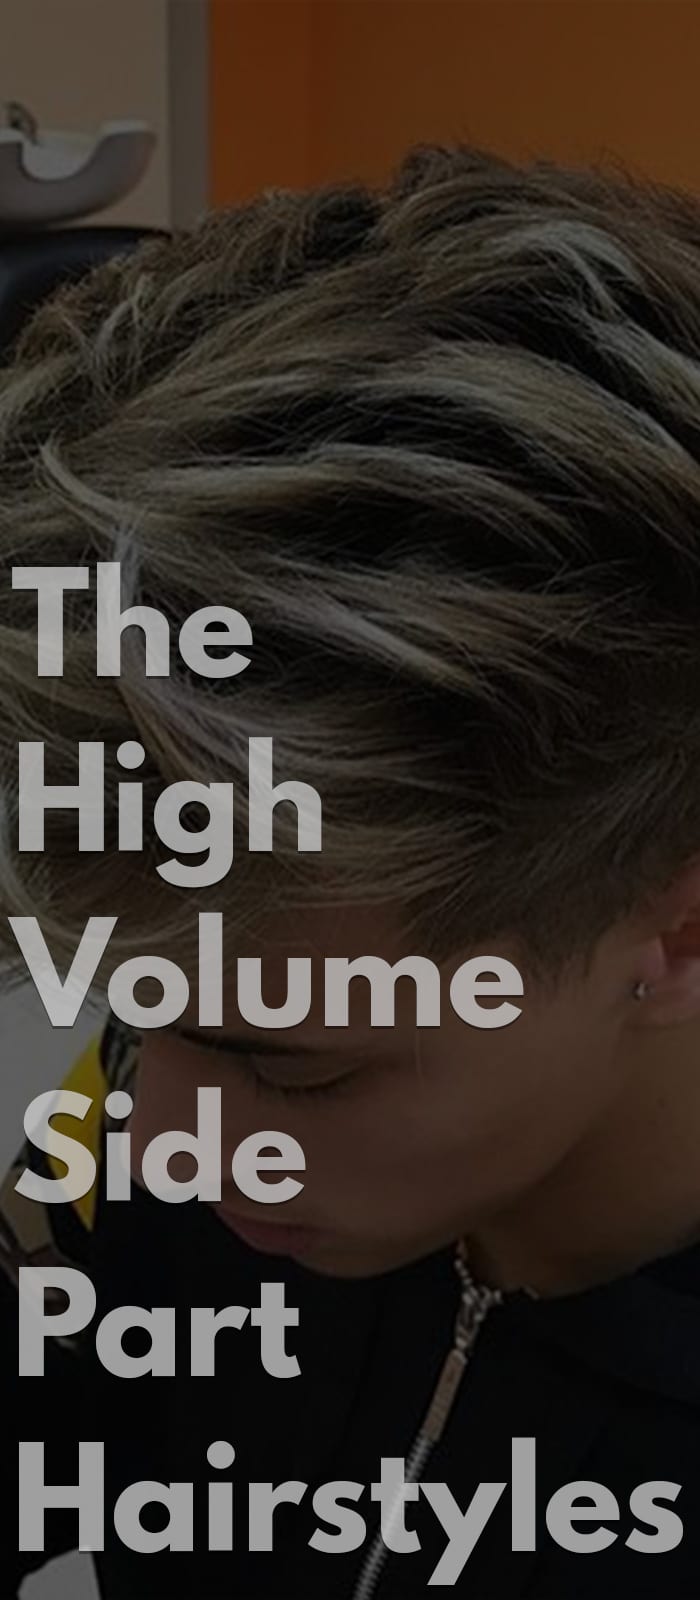 The High Volume Side Part Hairstyles